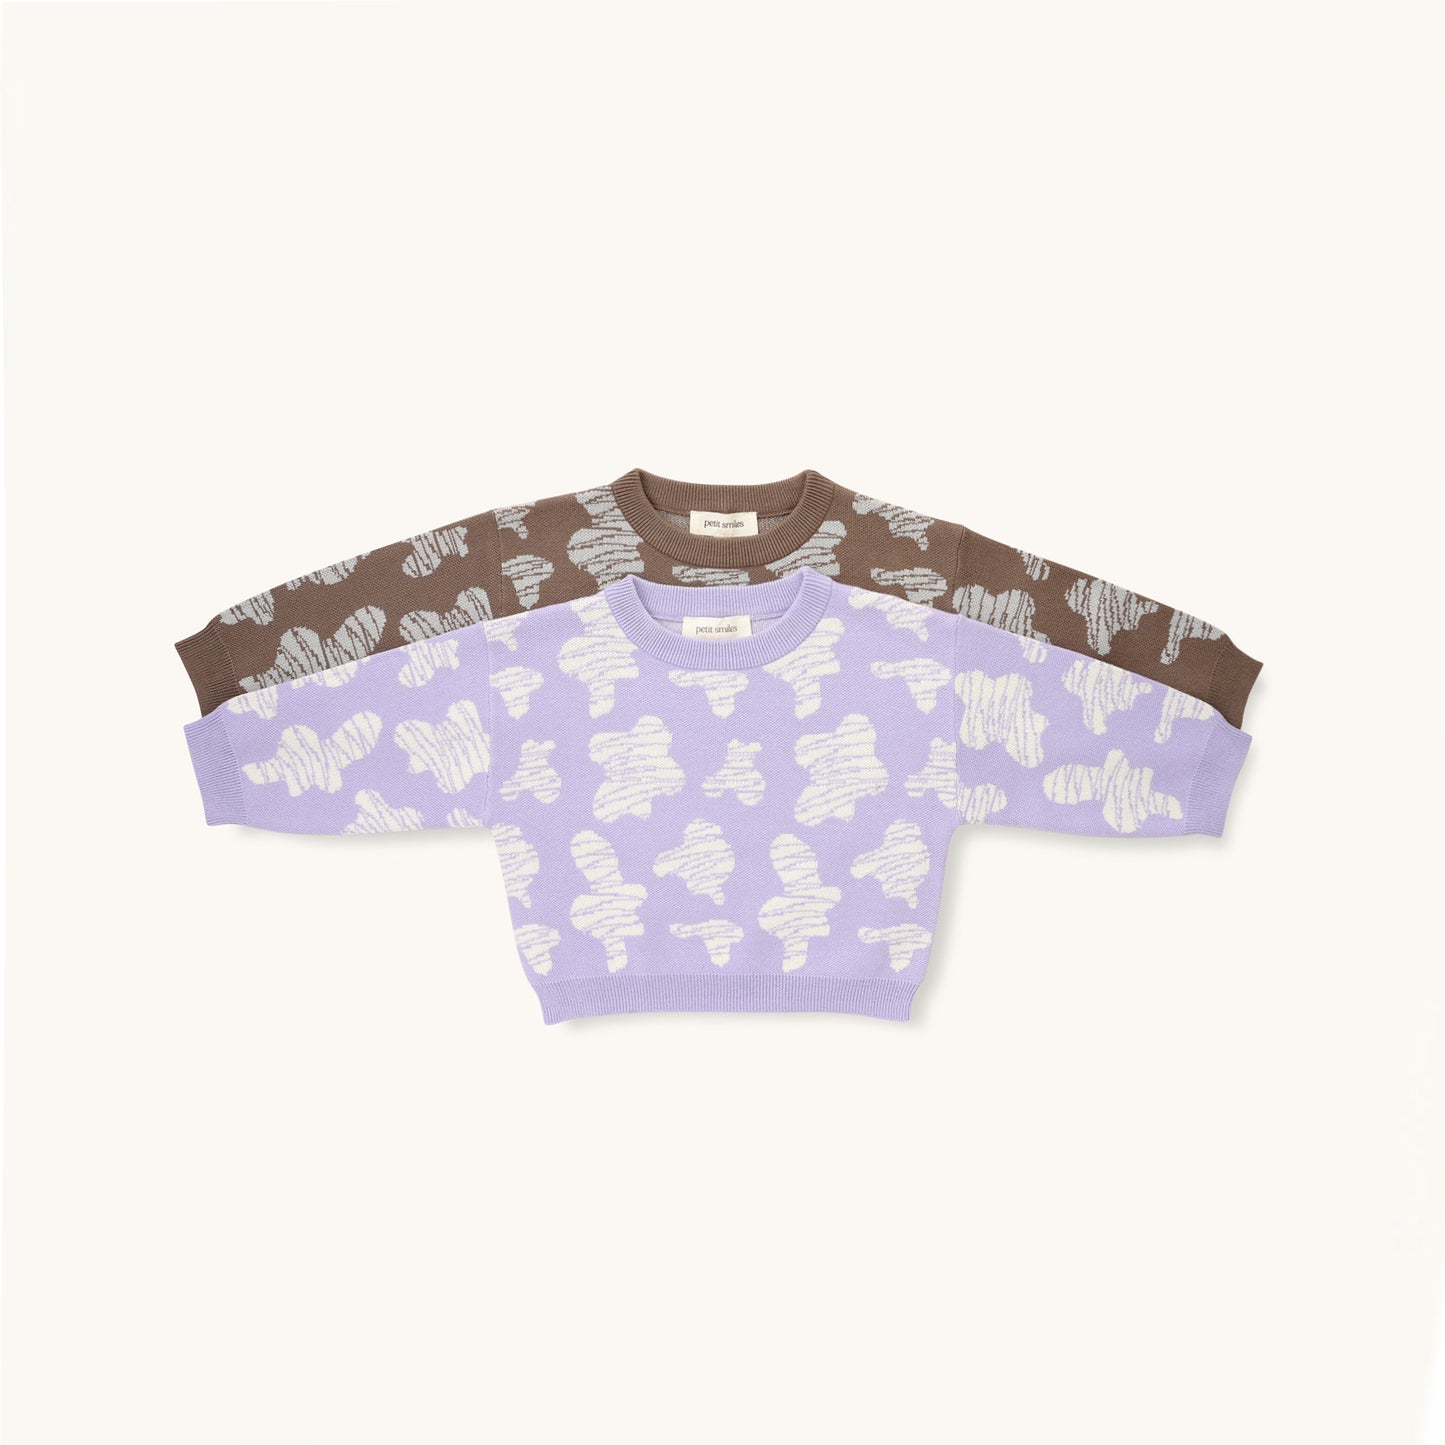 KNITTED SPOTS PULL OVER - TARO; 100% Organic Cotton; Jacquard Pull Over made from GOTS-certified organic cotton; 'Taro Spots' Jacquard pattern; Rib finish at neck, cuffs and hem; Dropped shoulder; Relaxed fit.